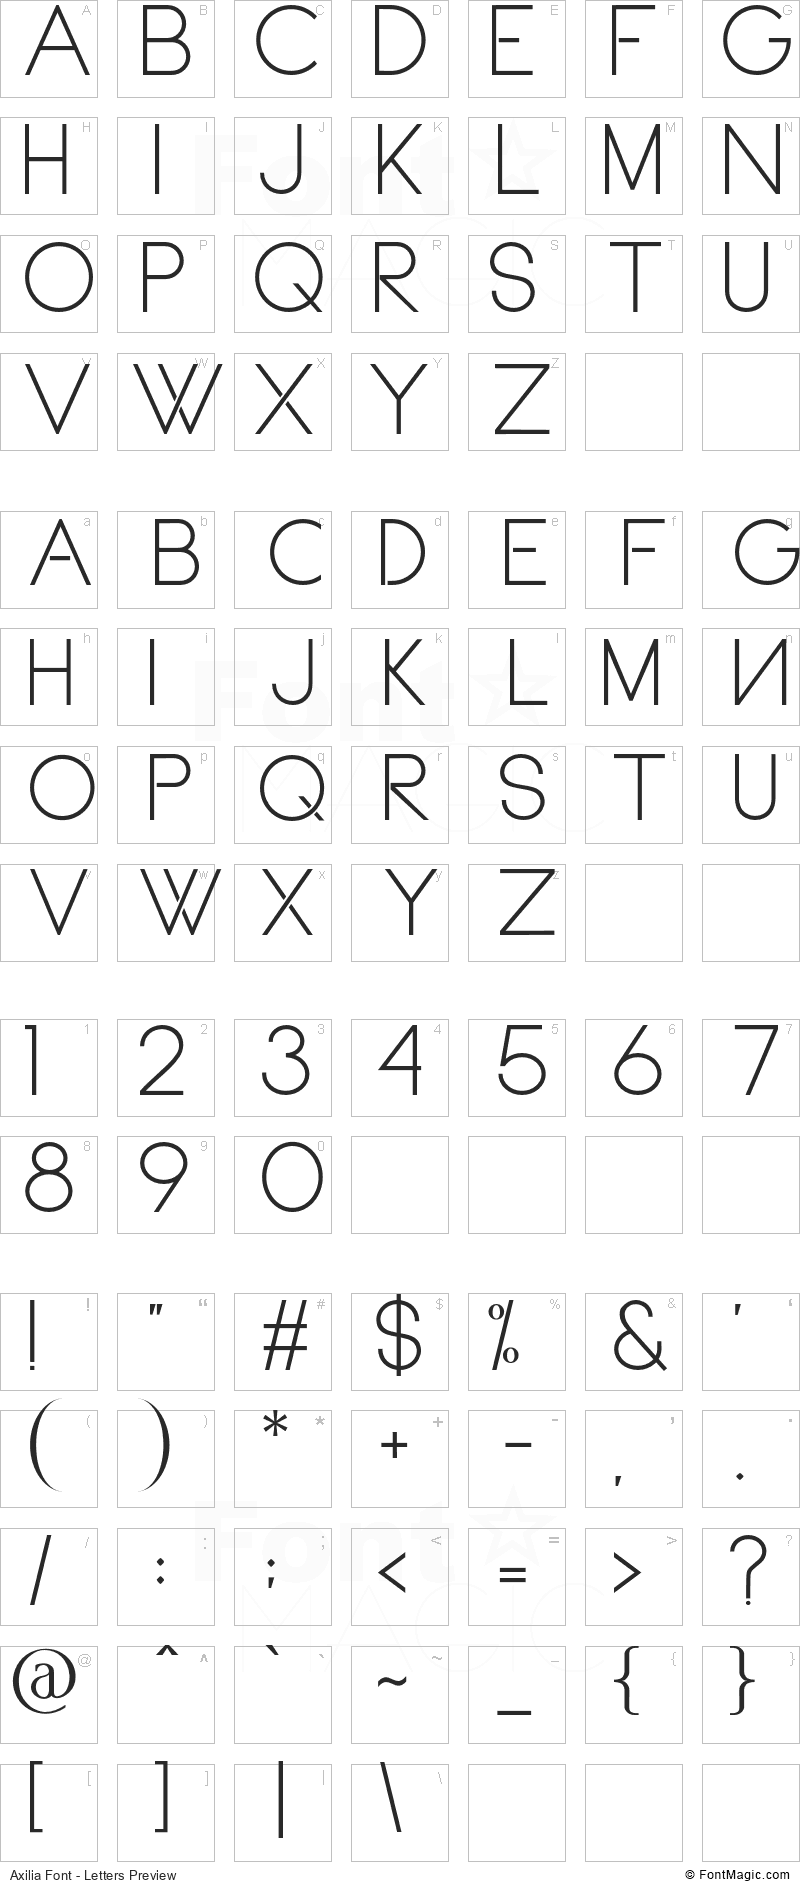 Axilia Font - All Latters Preview Chart